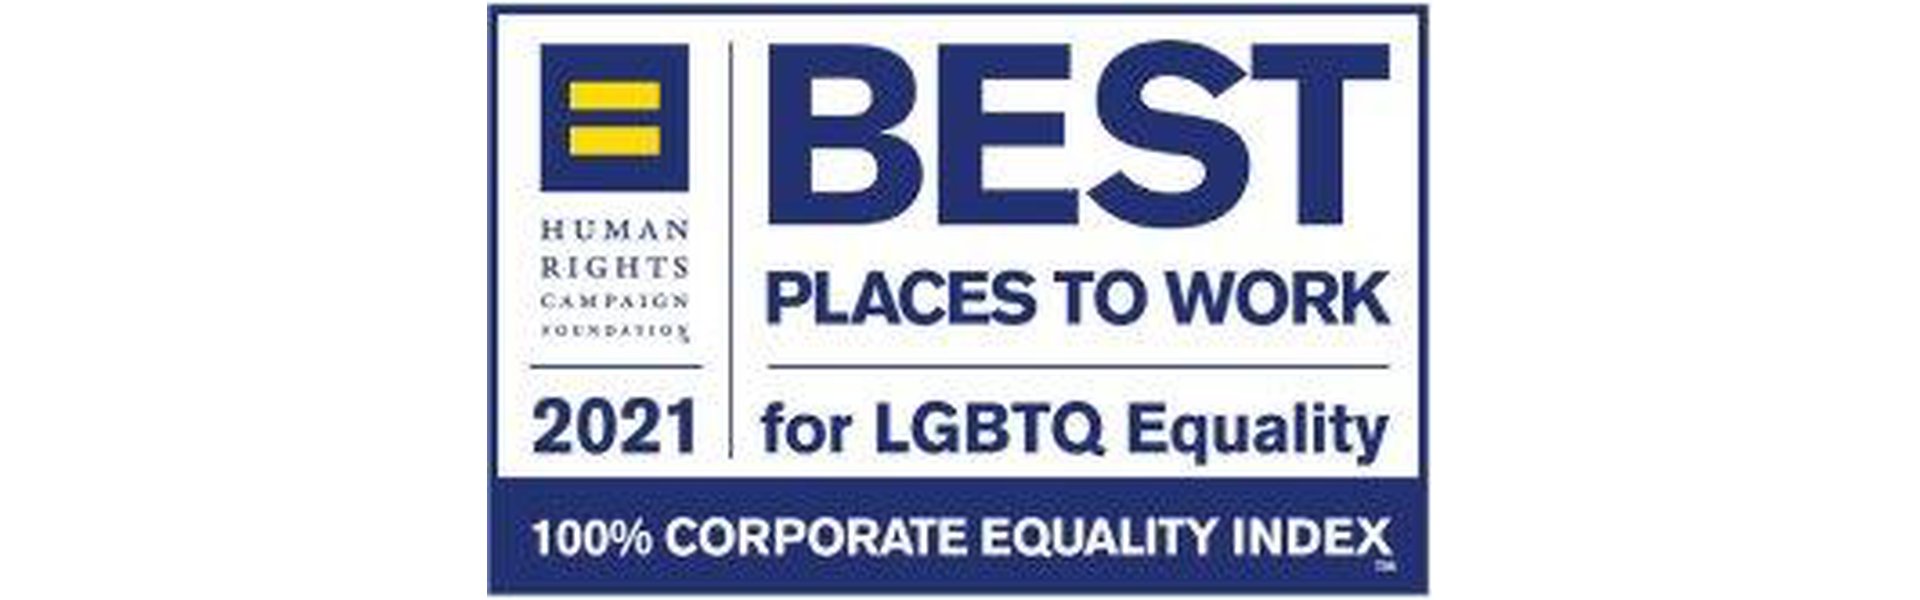 HRC CEI 2021 Best Places to Work for LGBT Equality